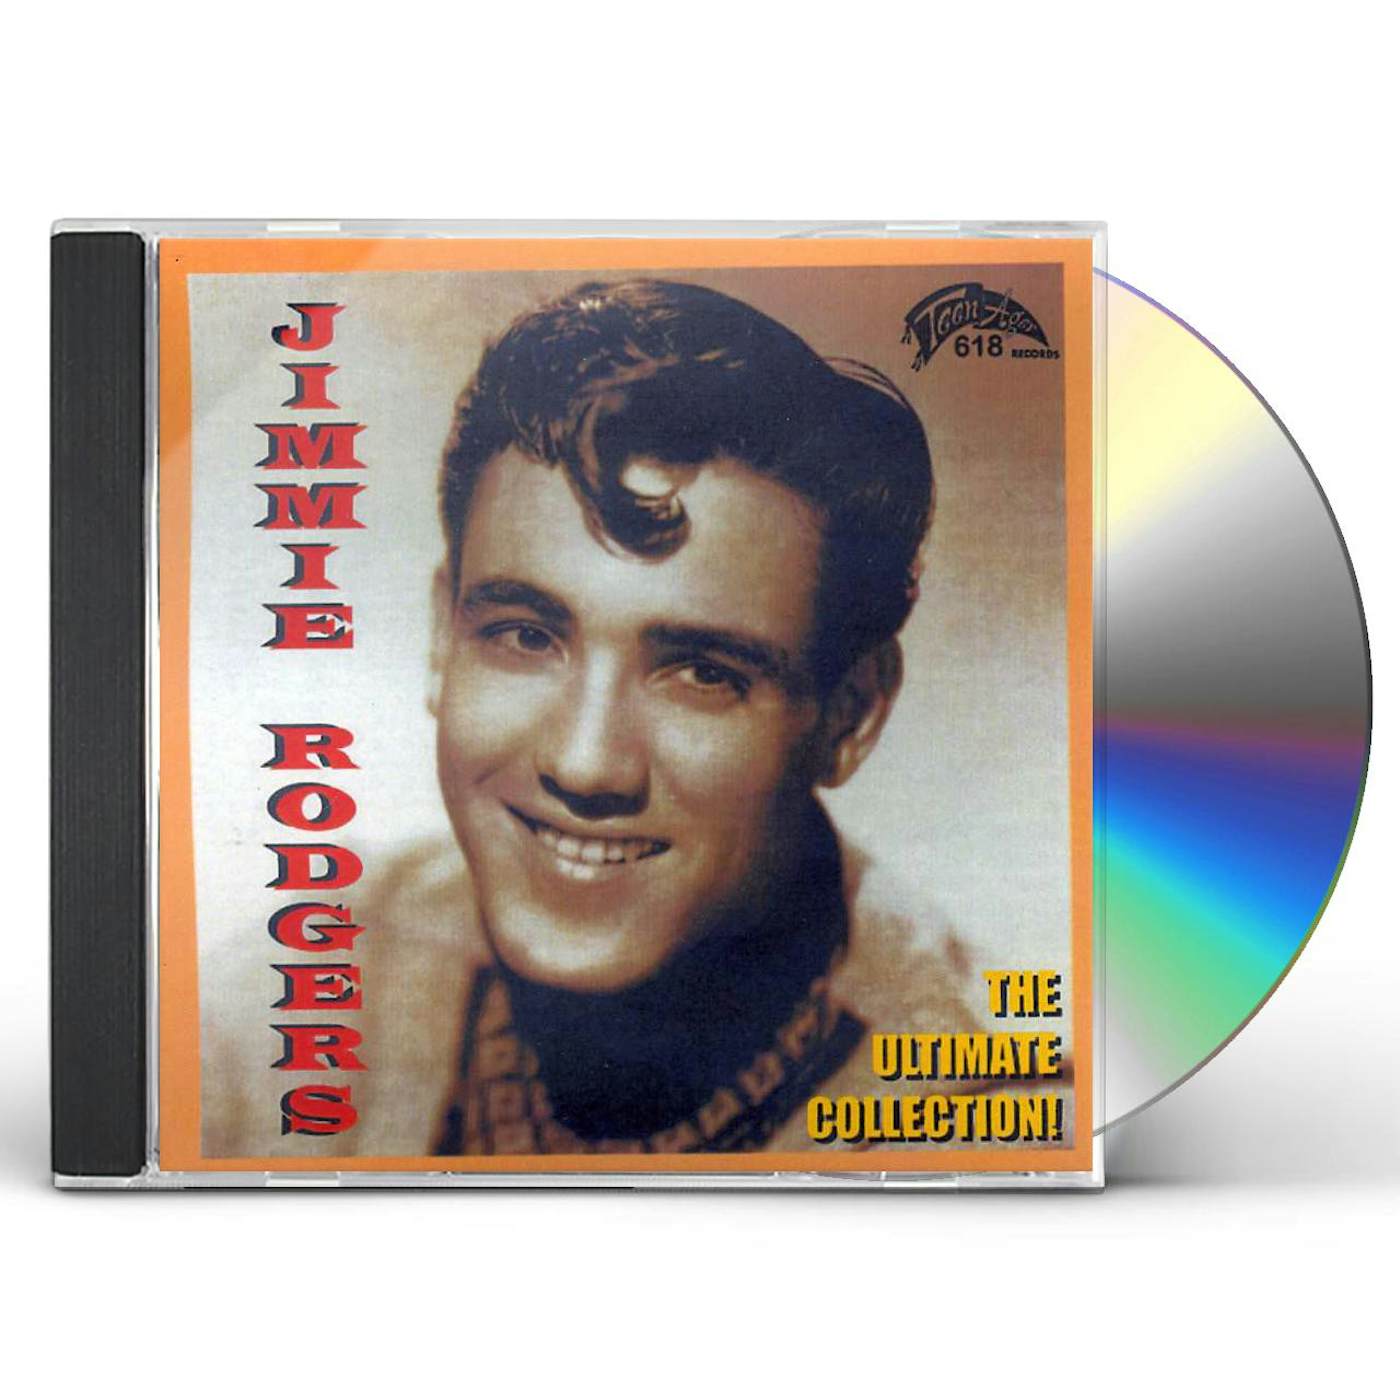 Jimmie Rodgers ULTIMATE COLLECTION CD